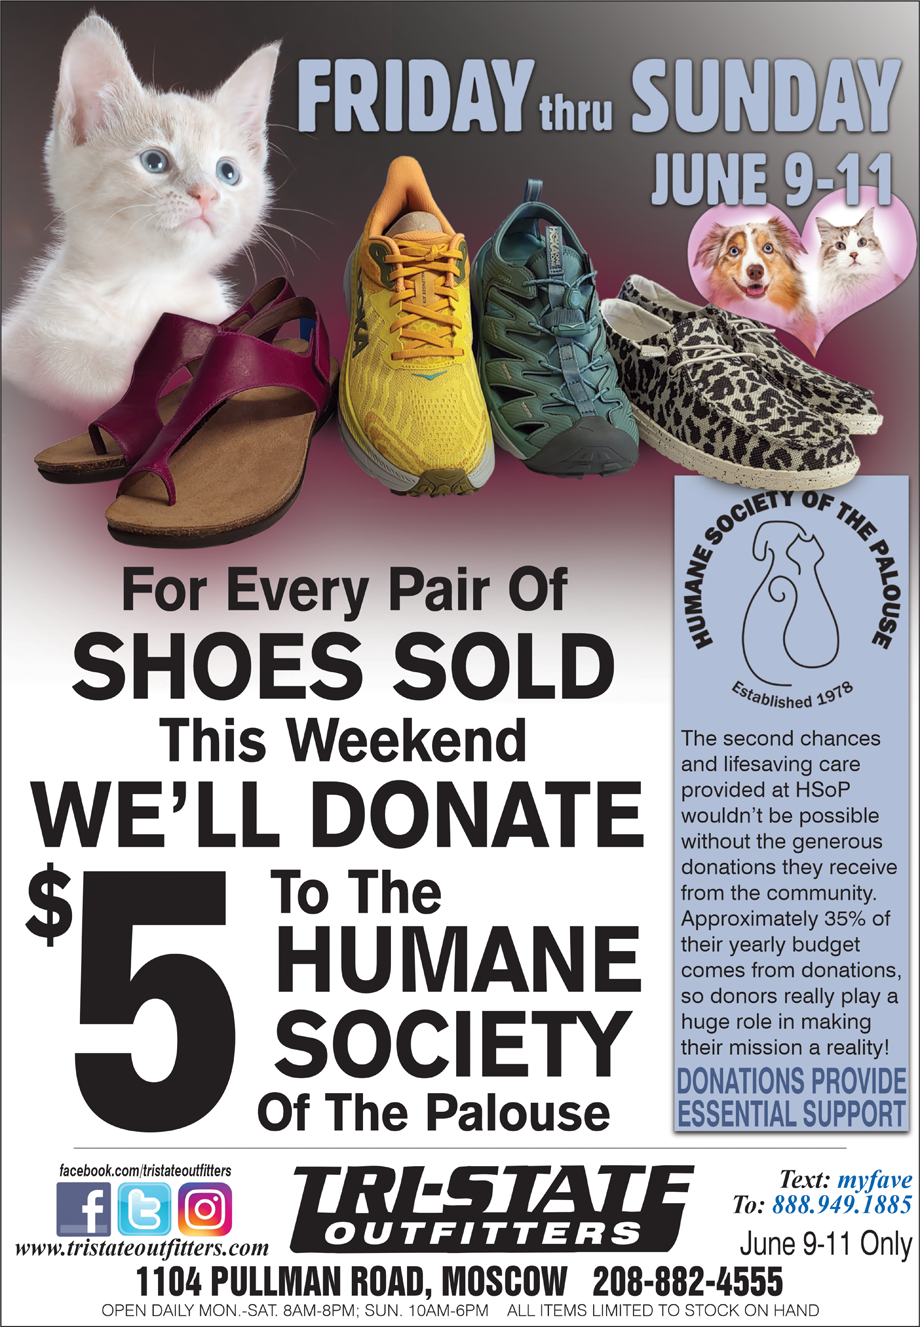 Moscow – Special Donation to Humane Society of the Palouse